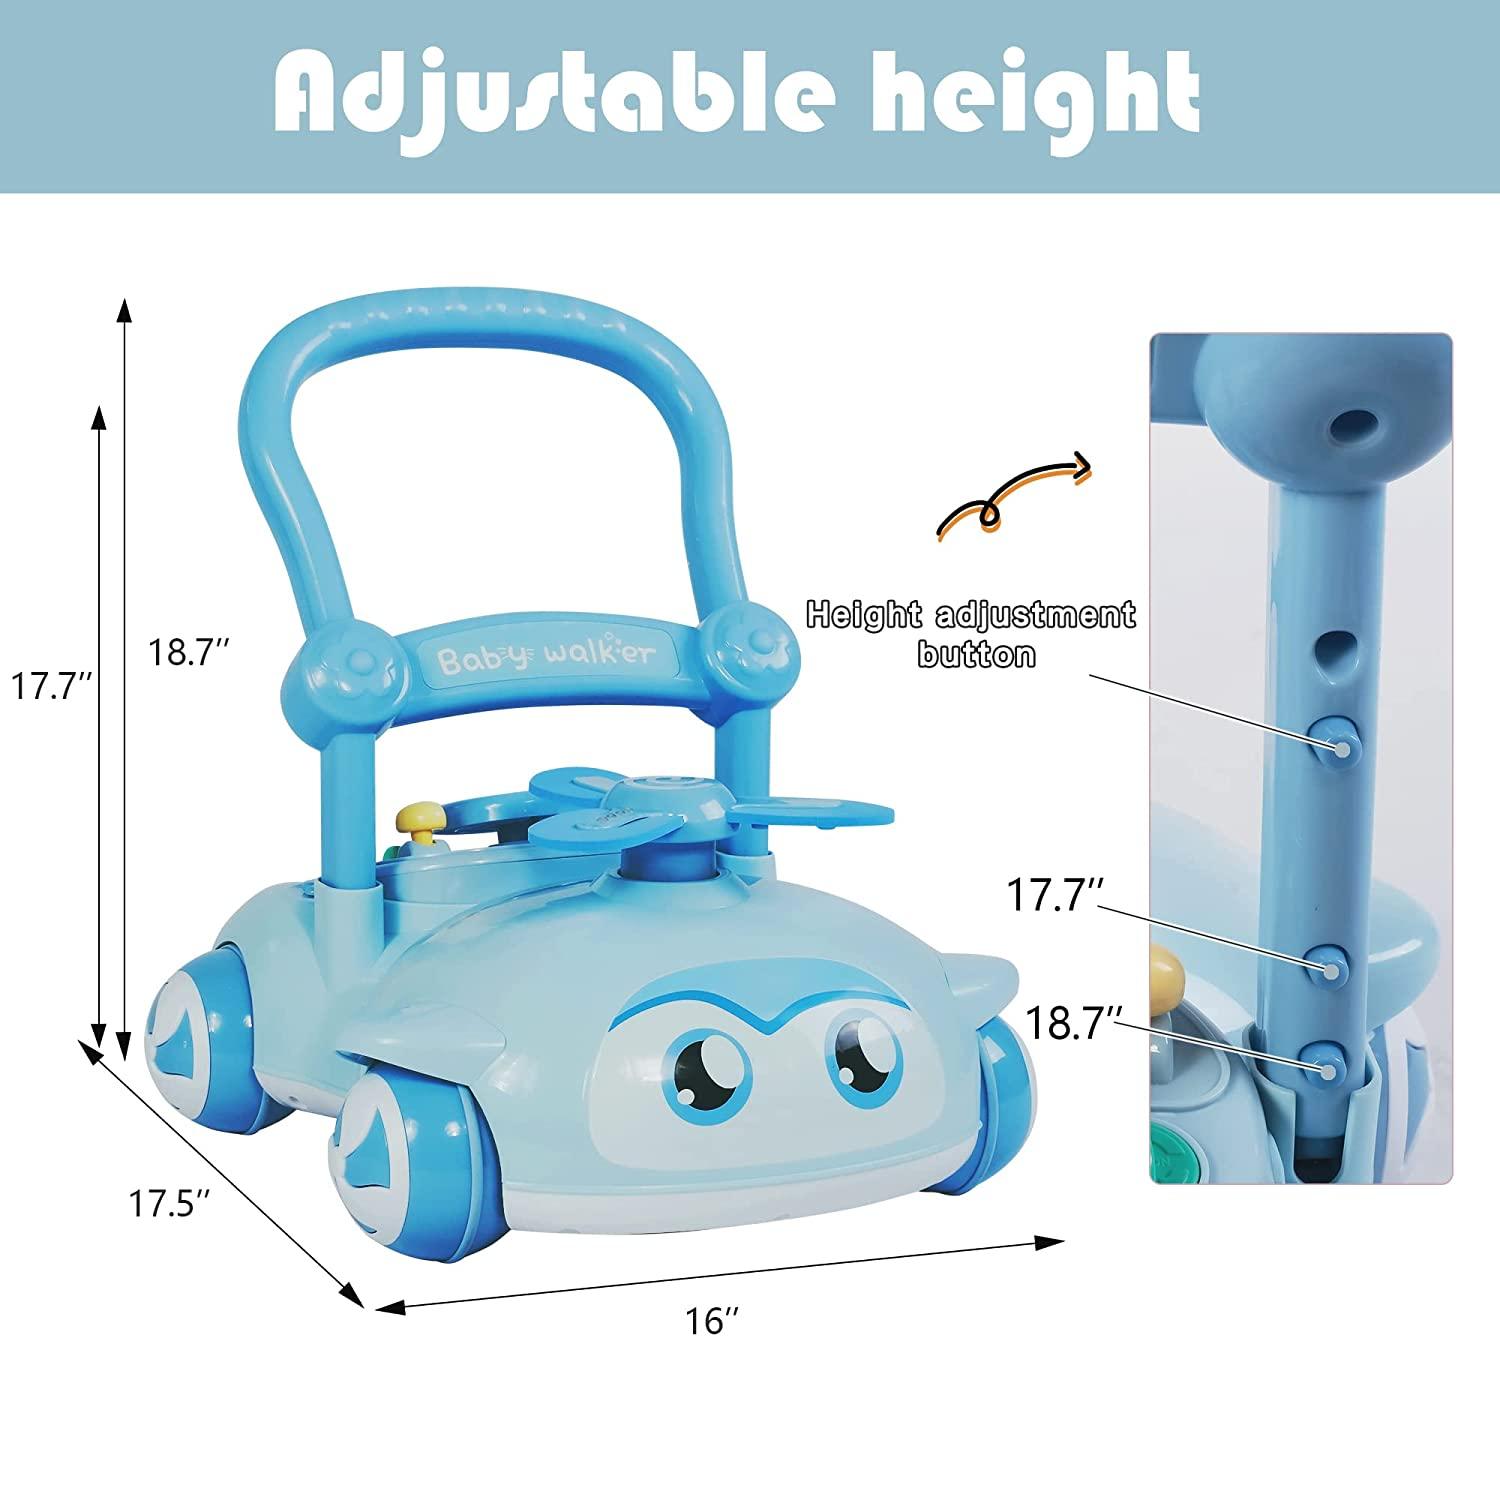 2 in 1 Sit-to-Stand Baby Walker for Boy Girl, Detachable, with Lights and Music, Cute Toys for Toddlers (Blue) - Bosonshop